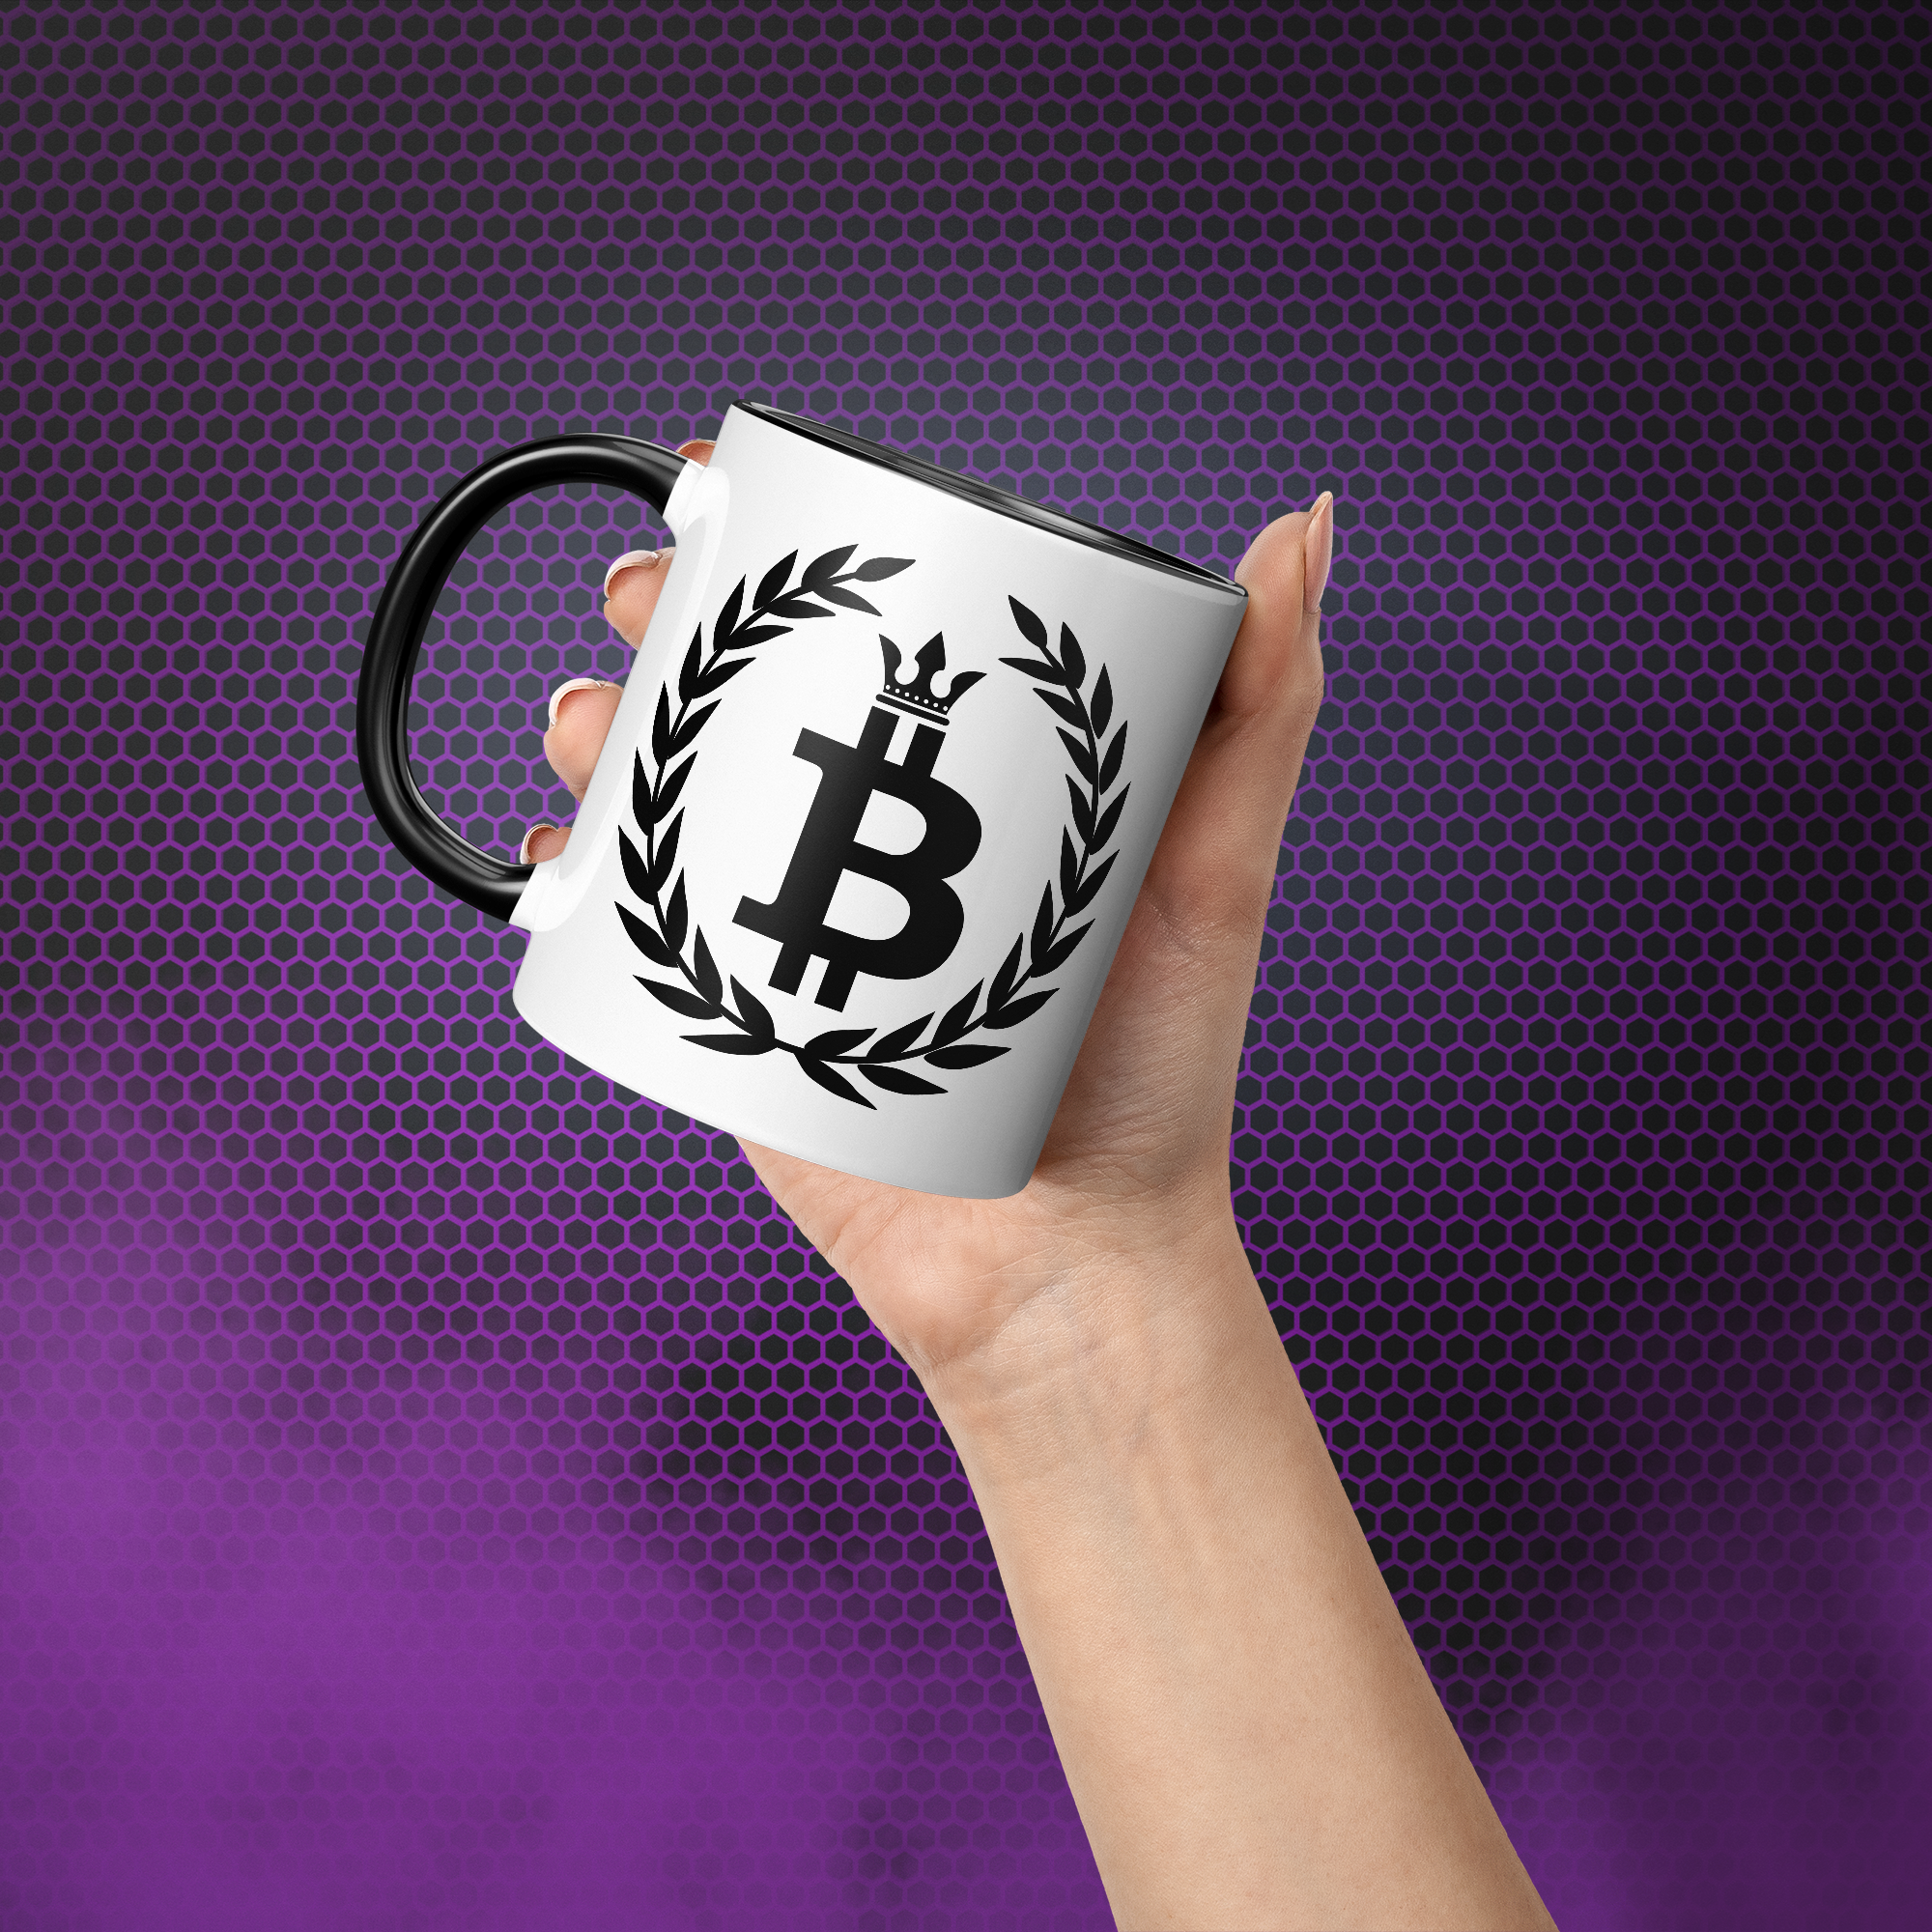  Gift for Bitcoin Lovers - Bitcoin Dominance Mug. Hand model image. Available at NEONCRYPTO STORE.